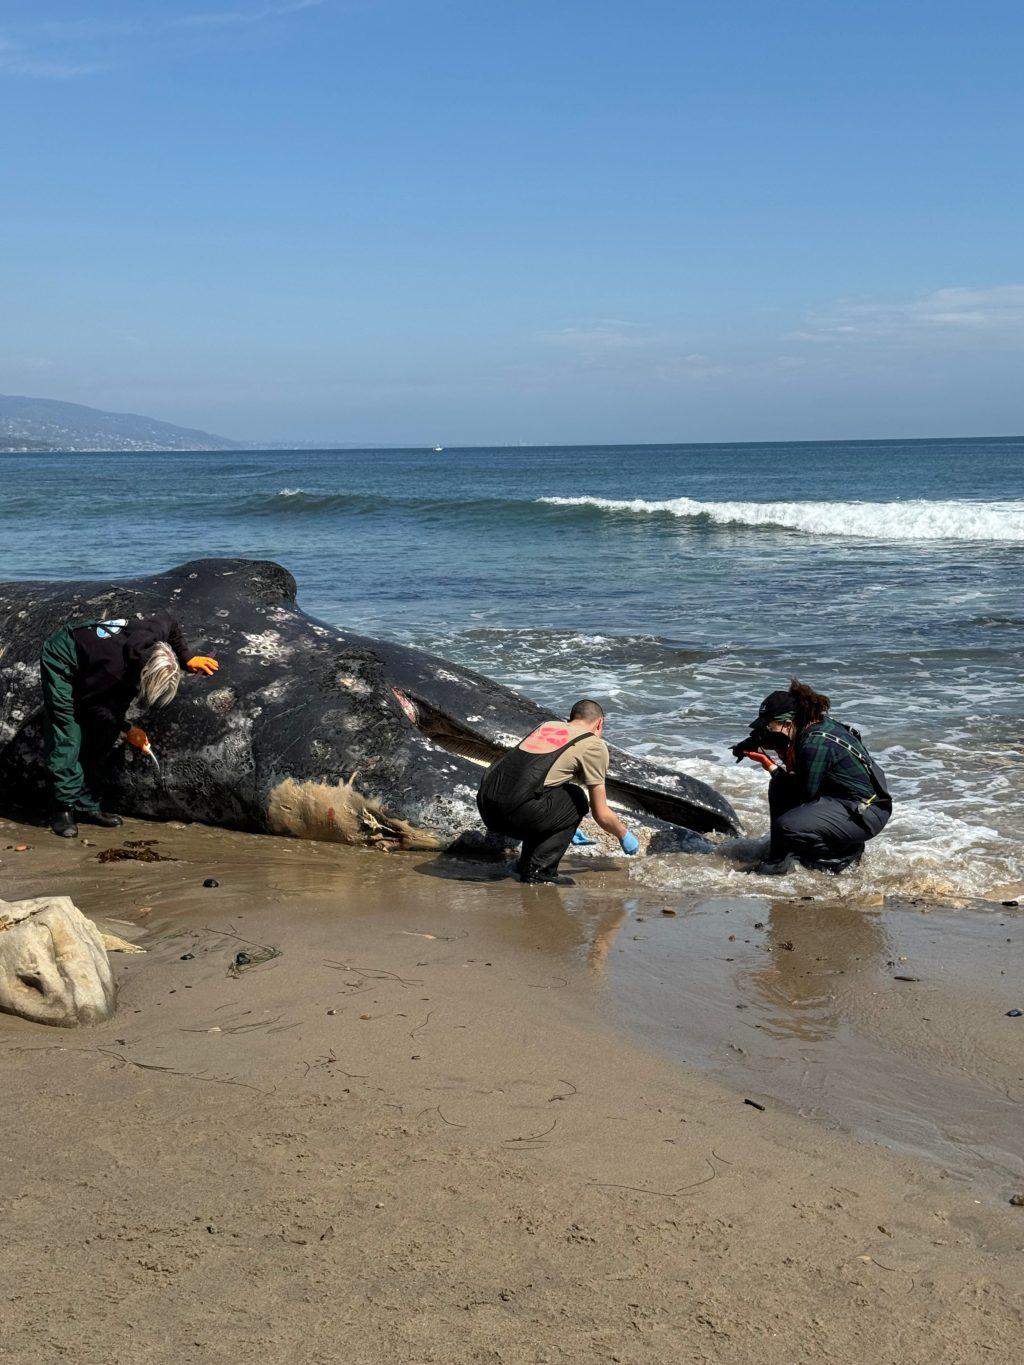 The California Wildlife Center and the Ocean Animal Response and Research Alliance collected samples of the whale carcass March 16, after it washed ashore Little Dume Beach to determine the cause of death. The CWC planned to share the data with the Malibu community, Henderson said. Photo courtesy of the California Wildlife Center